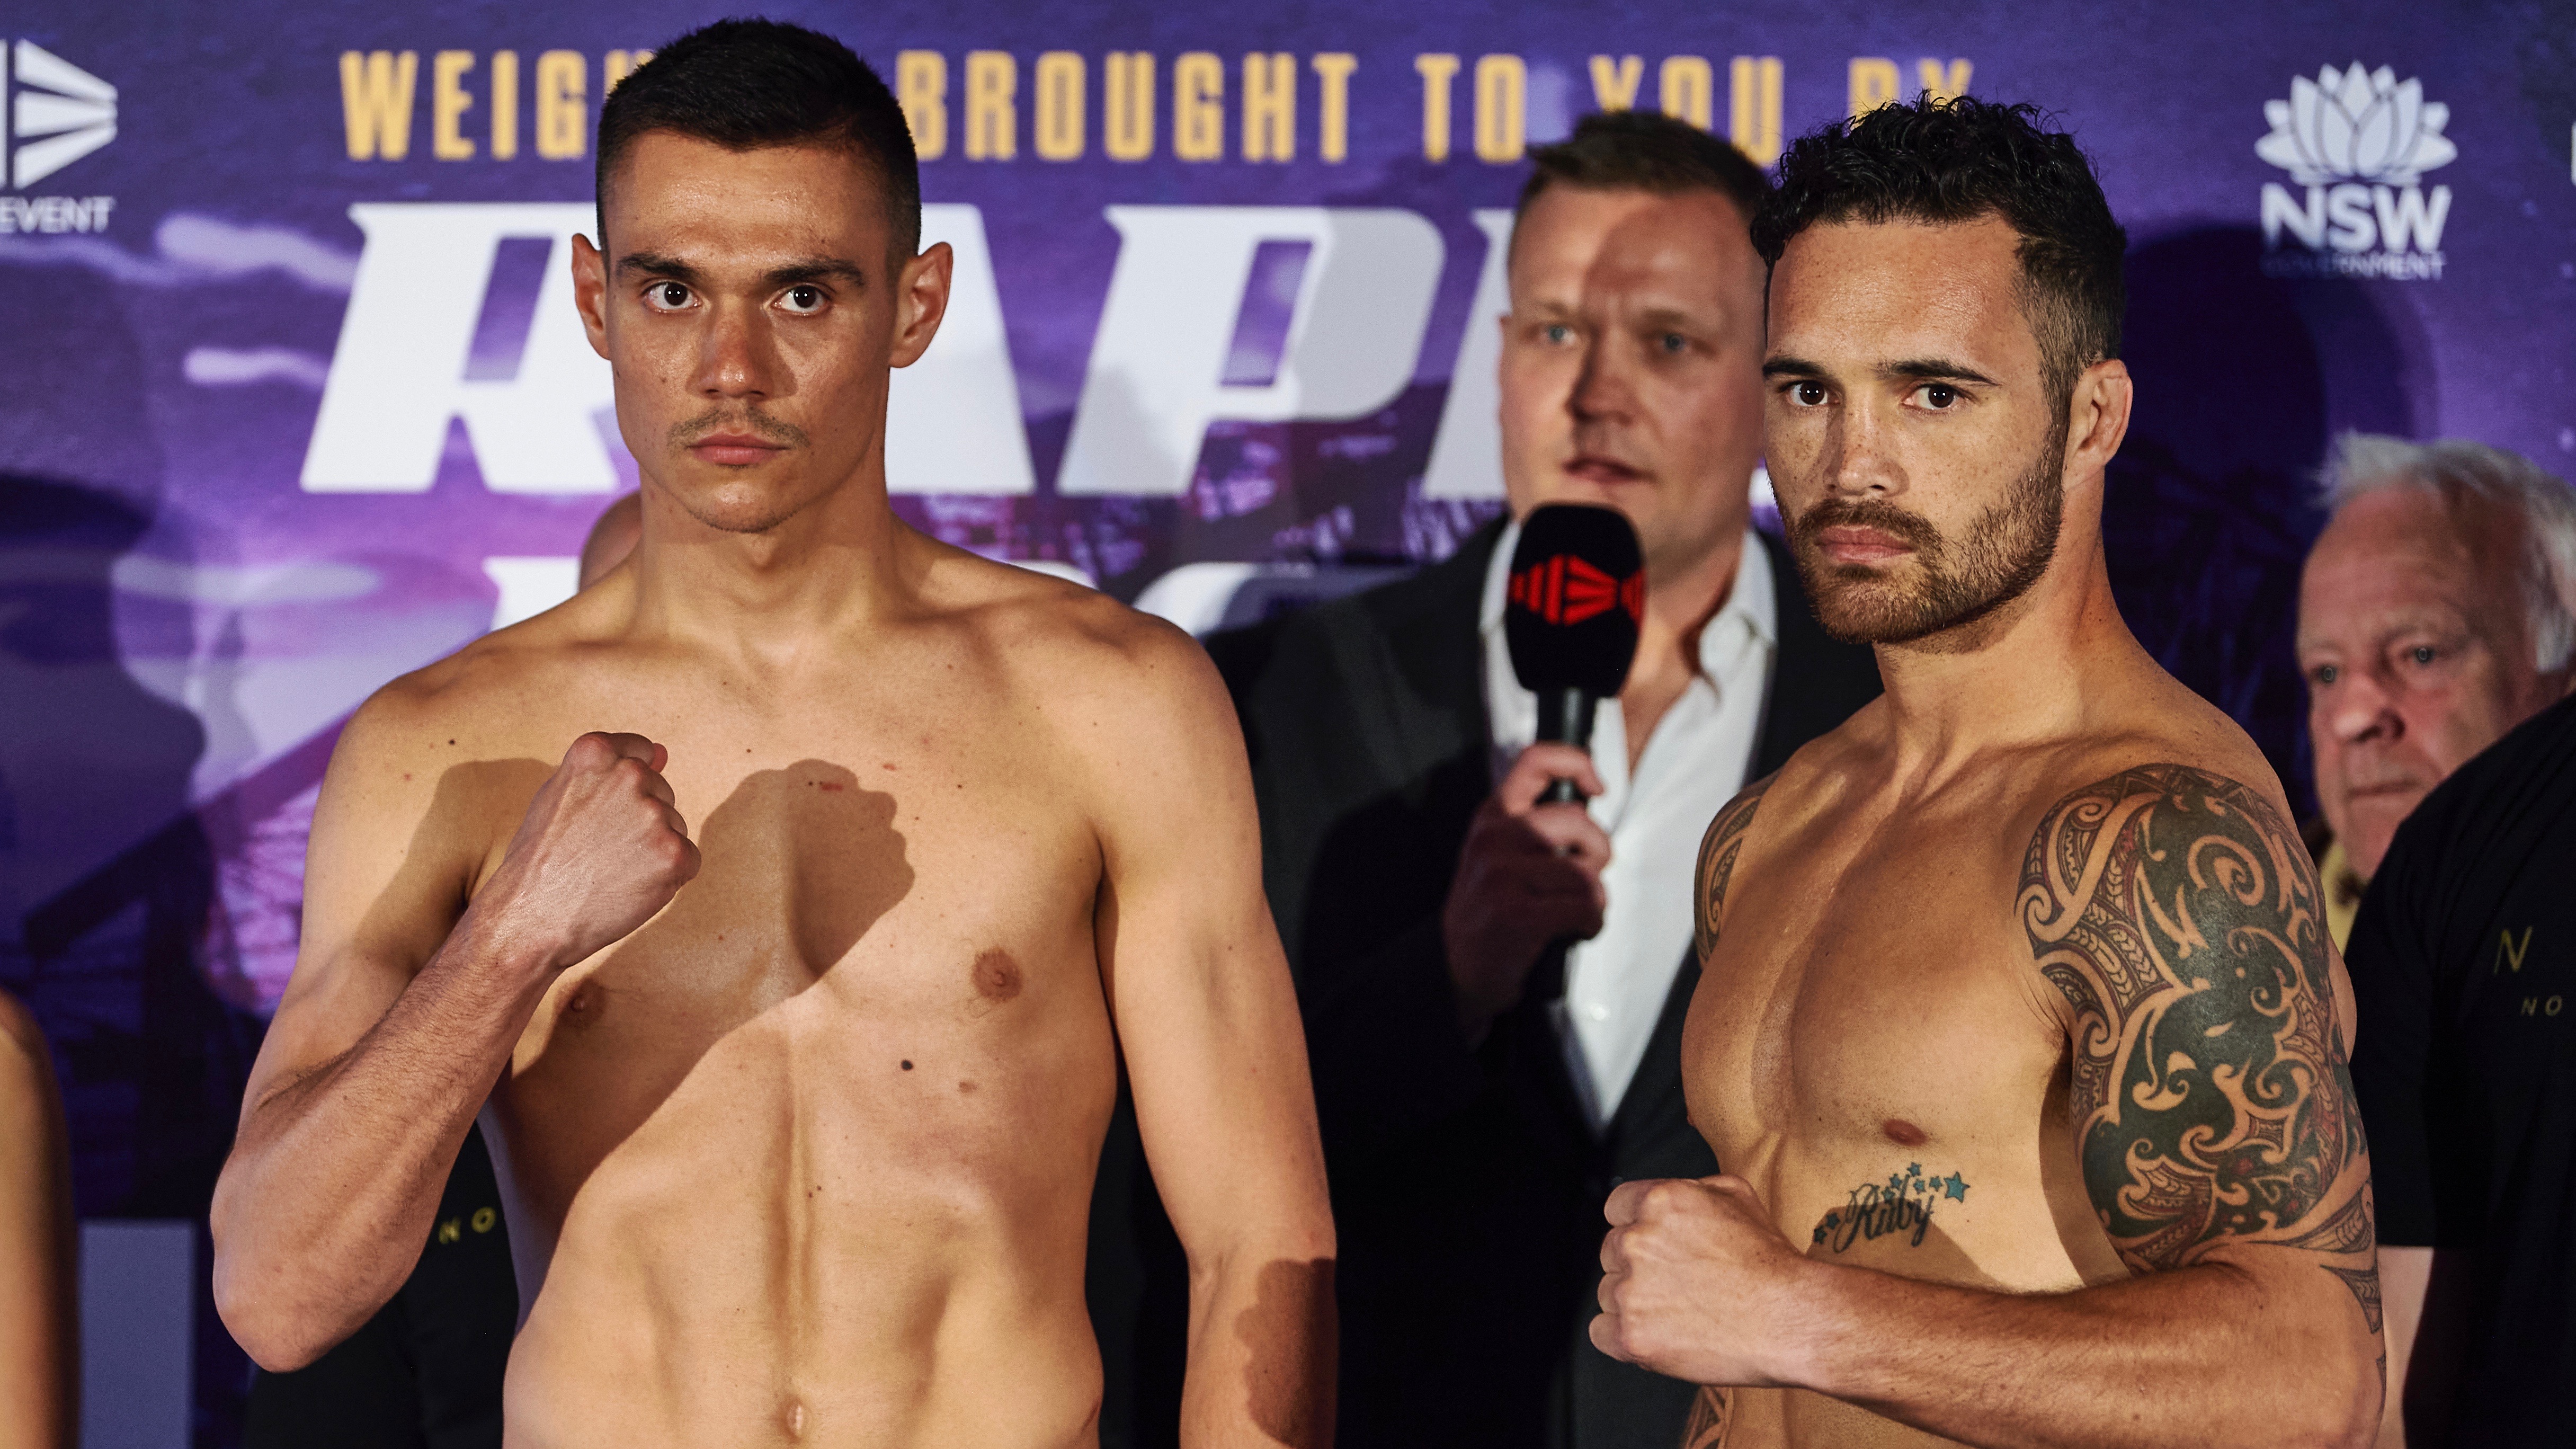 Tszyu vs Morgan live stream start time and how to watch from anywhere right now TechRadar